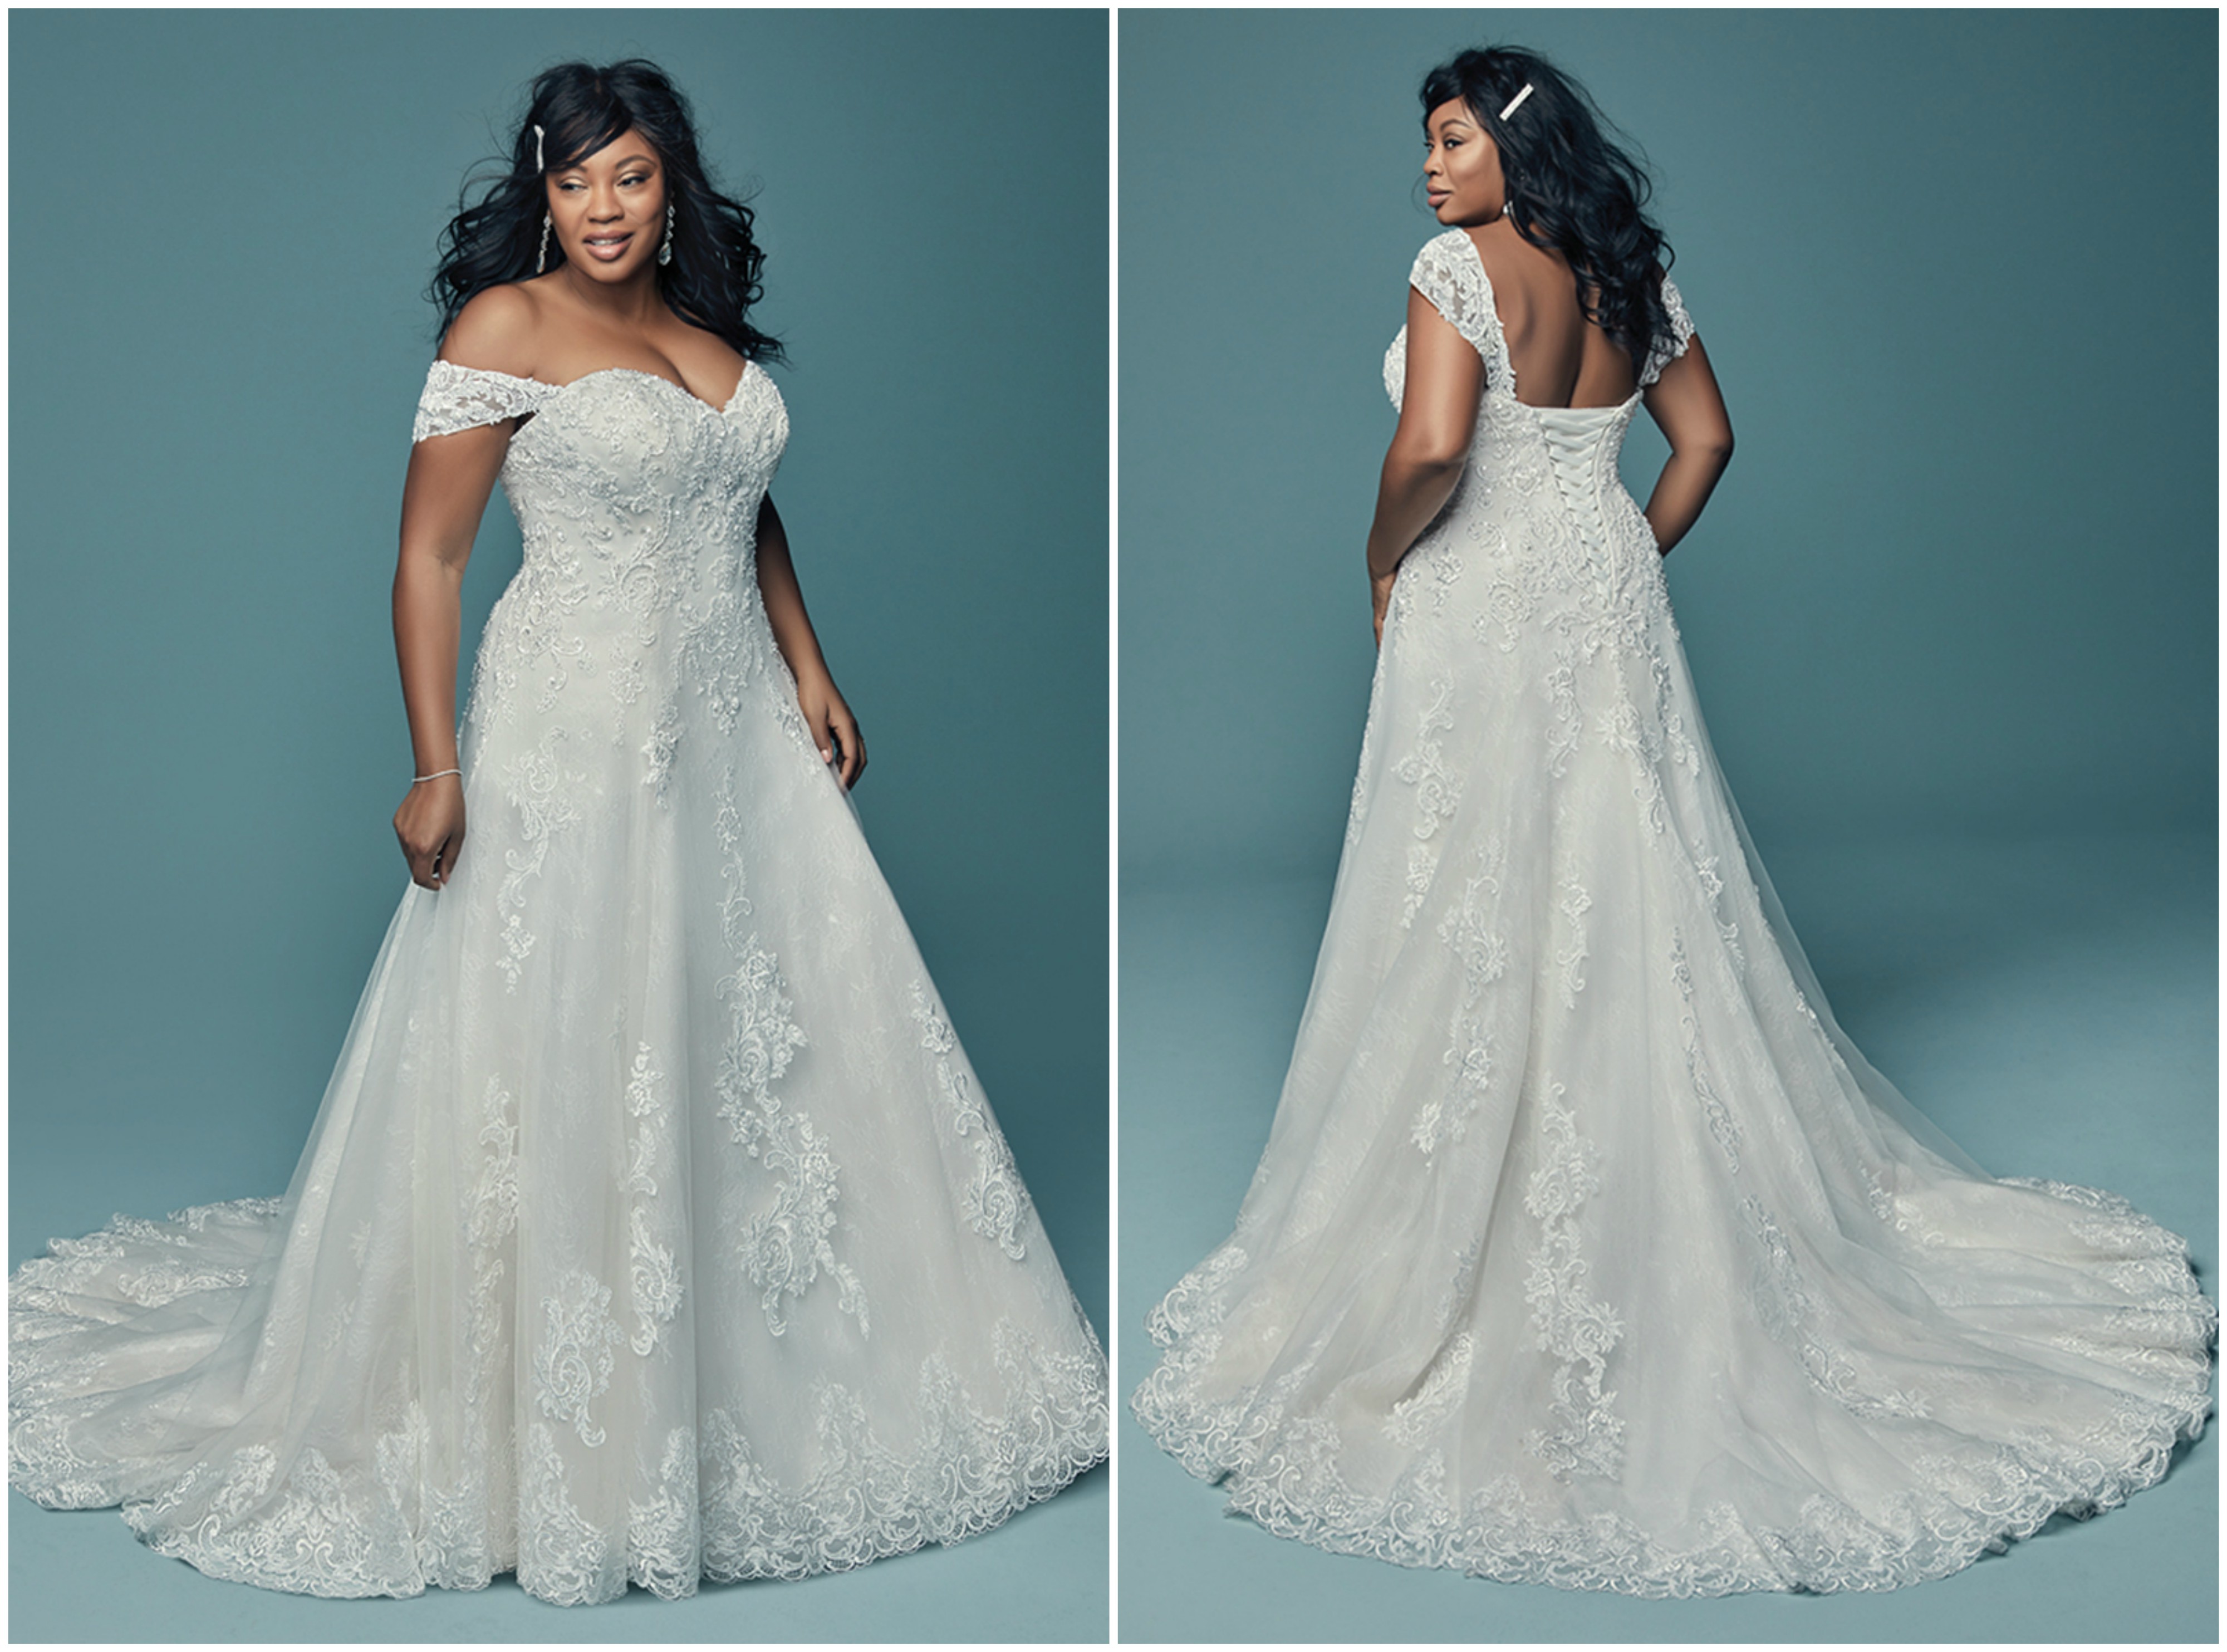 <a href="https://www.maggiesottero.com/maggie-sottero/gail/11475" target="_blank">Maggie Sottero</a>